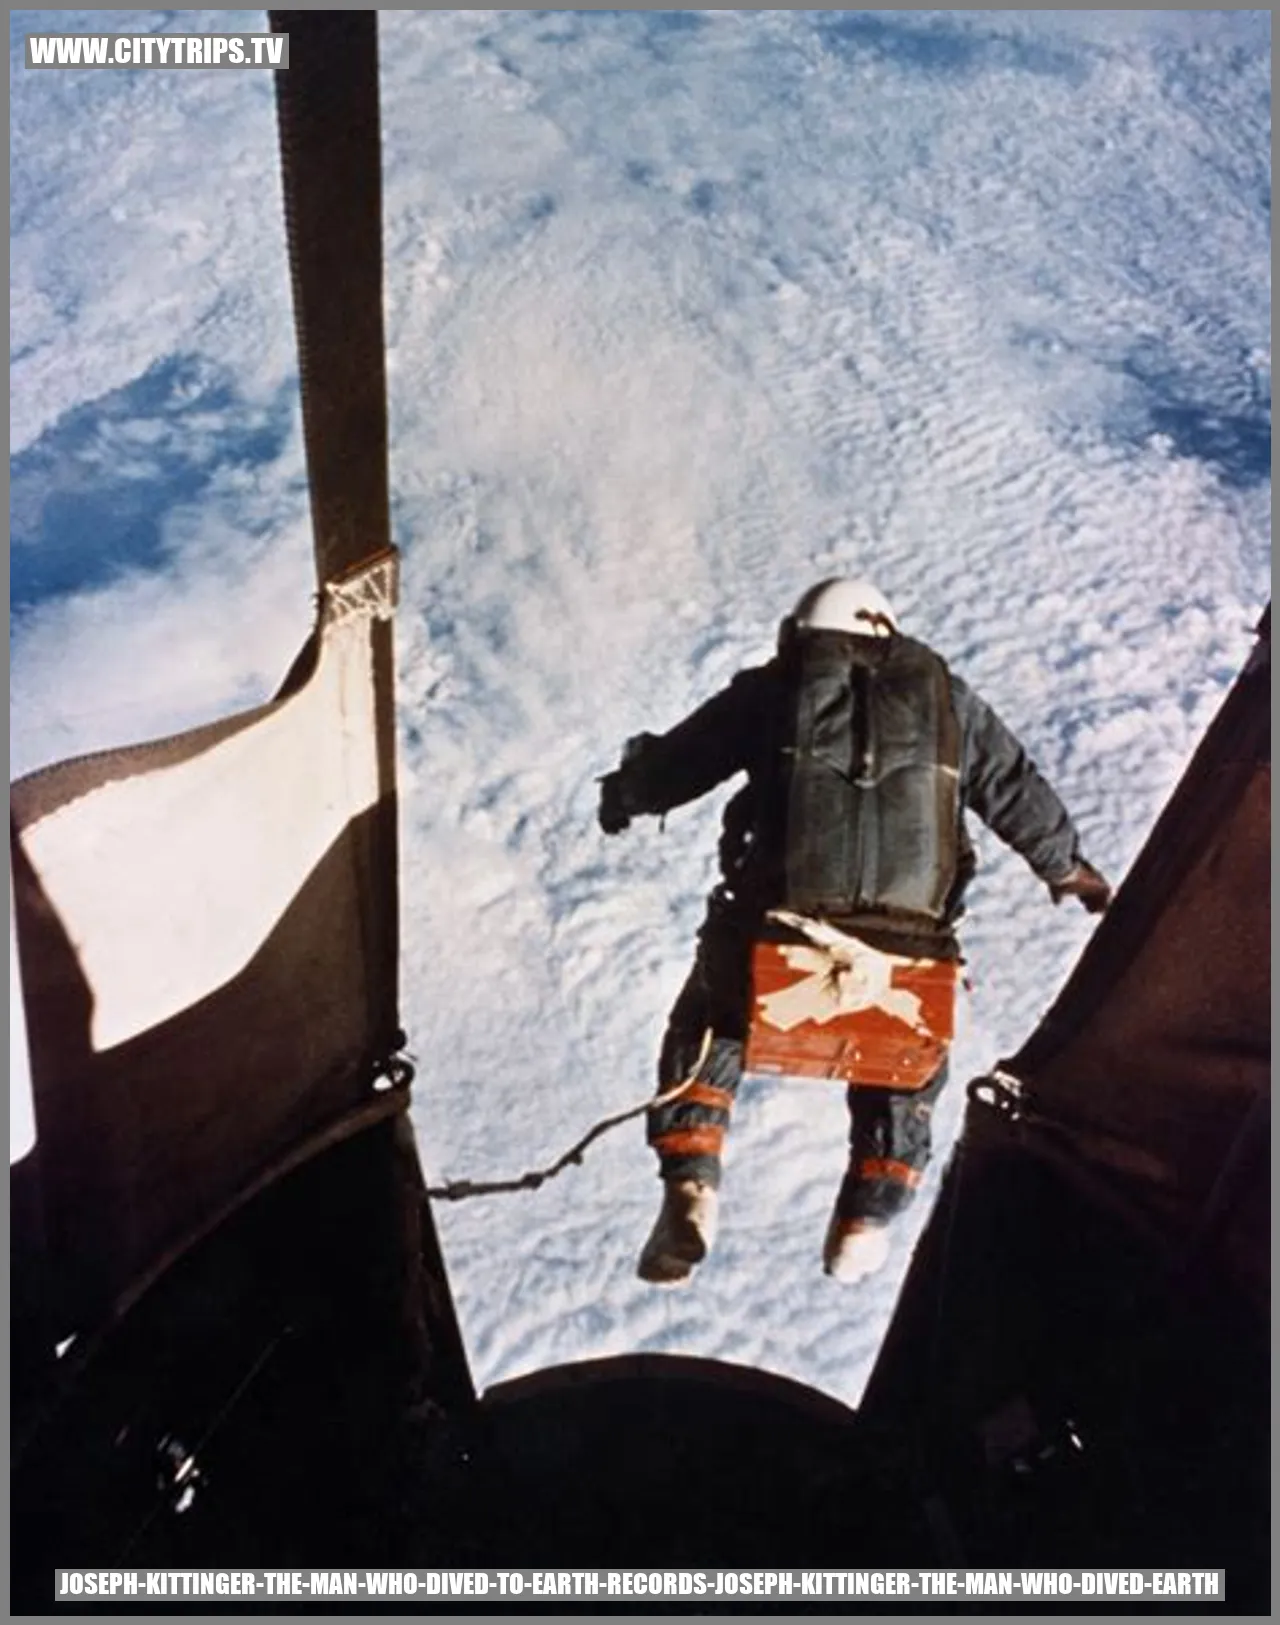 Joseph Kittinger: The Man Who Dived to Earth - Records